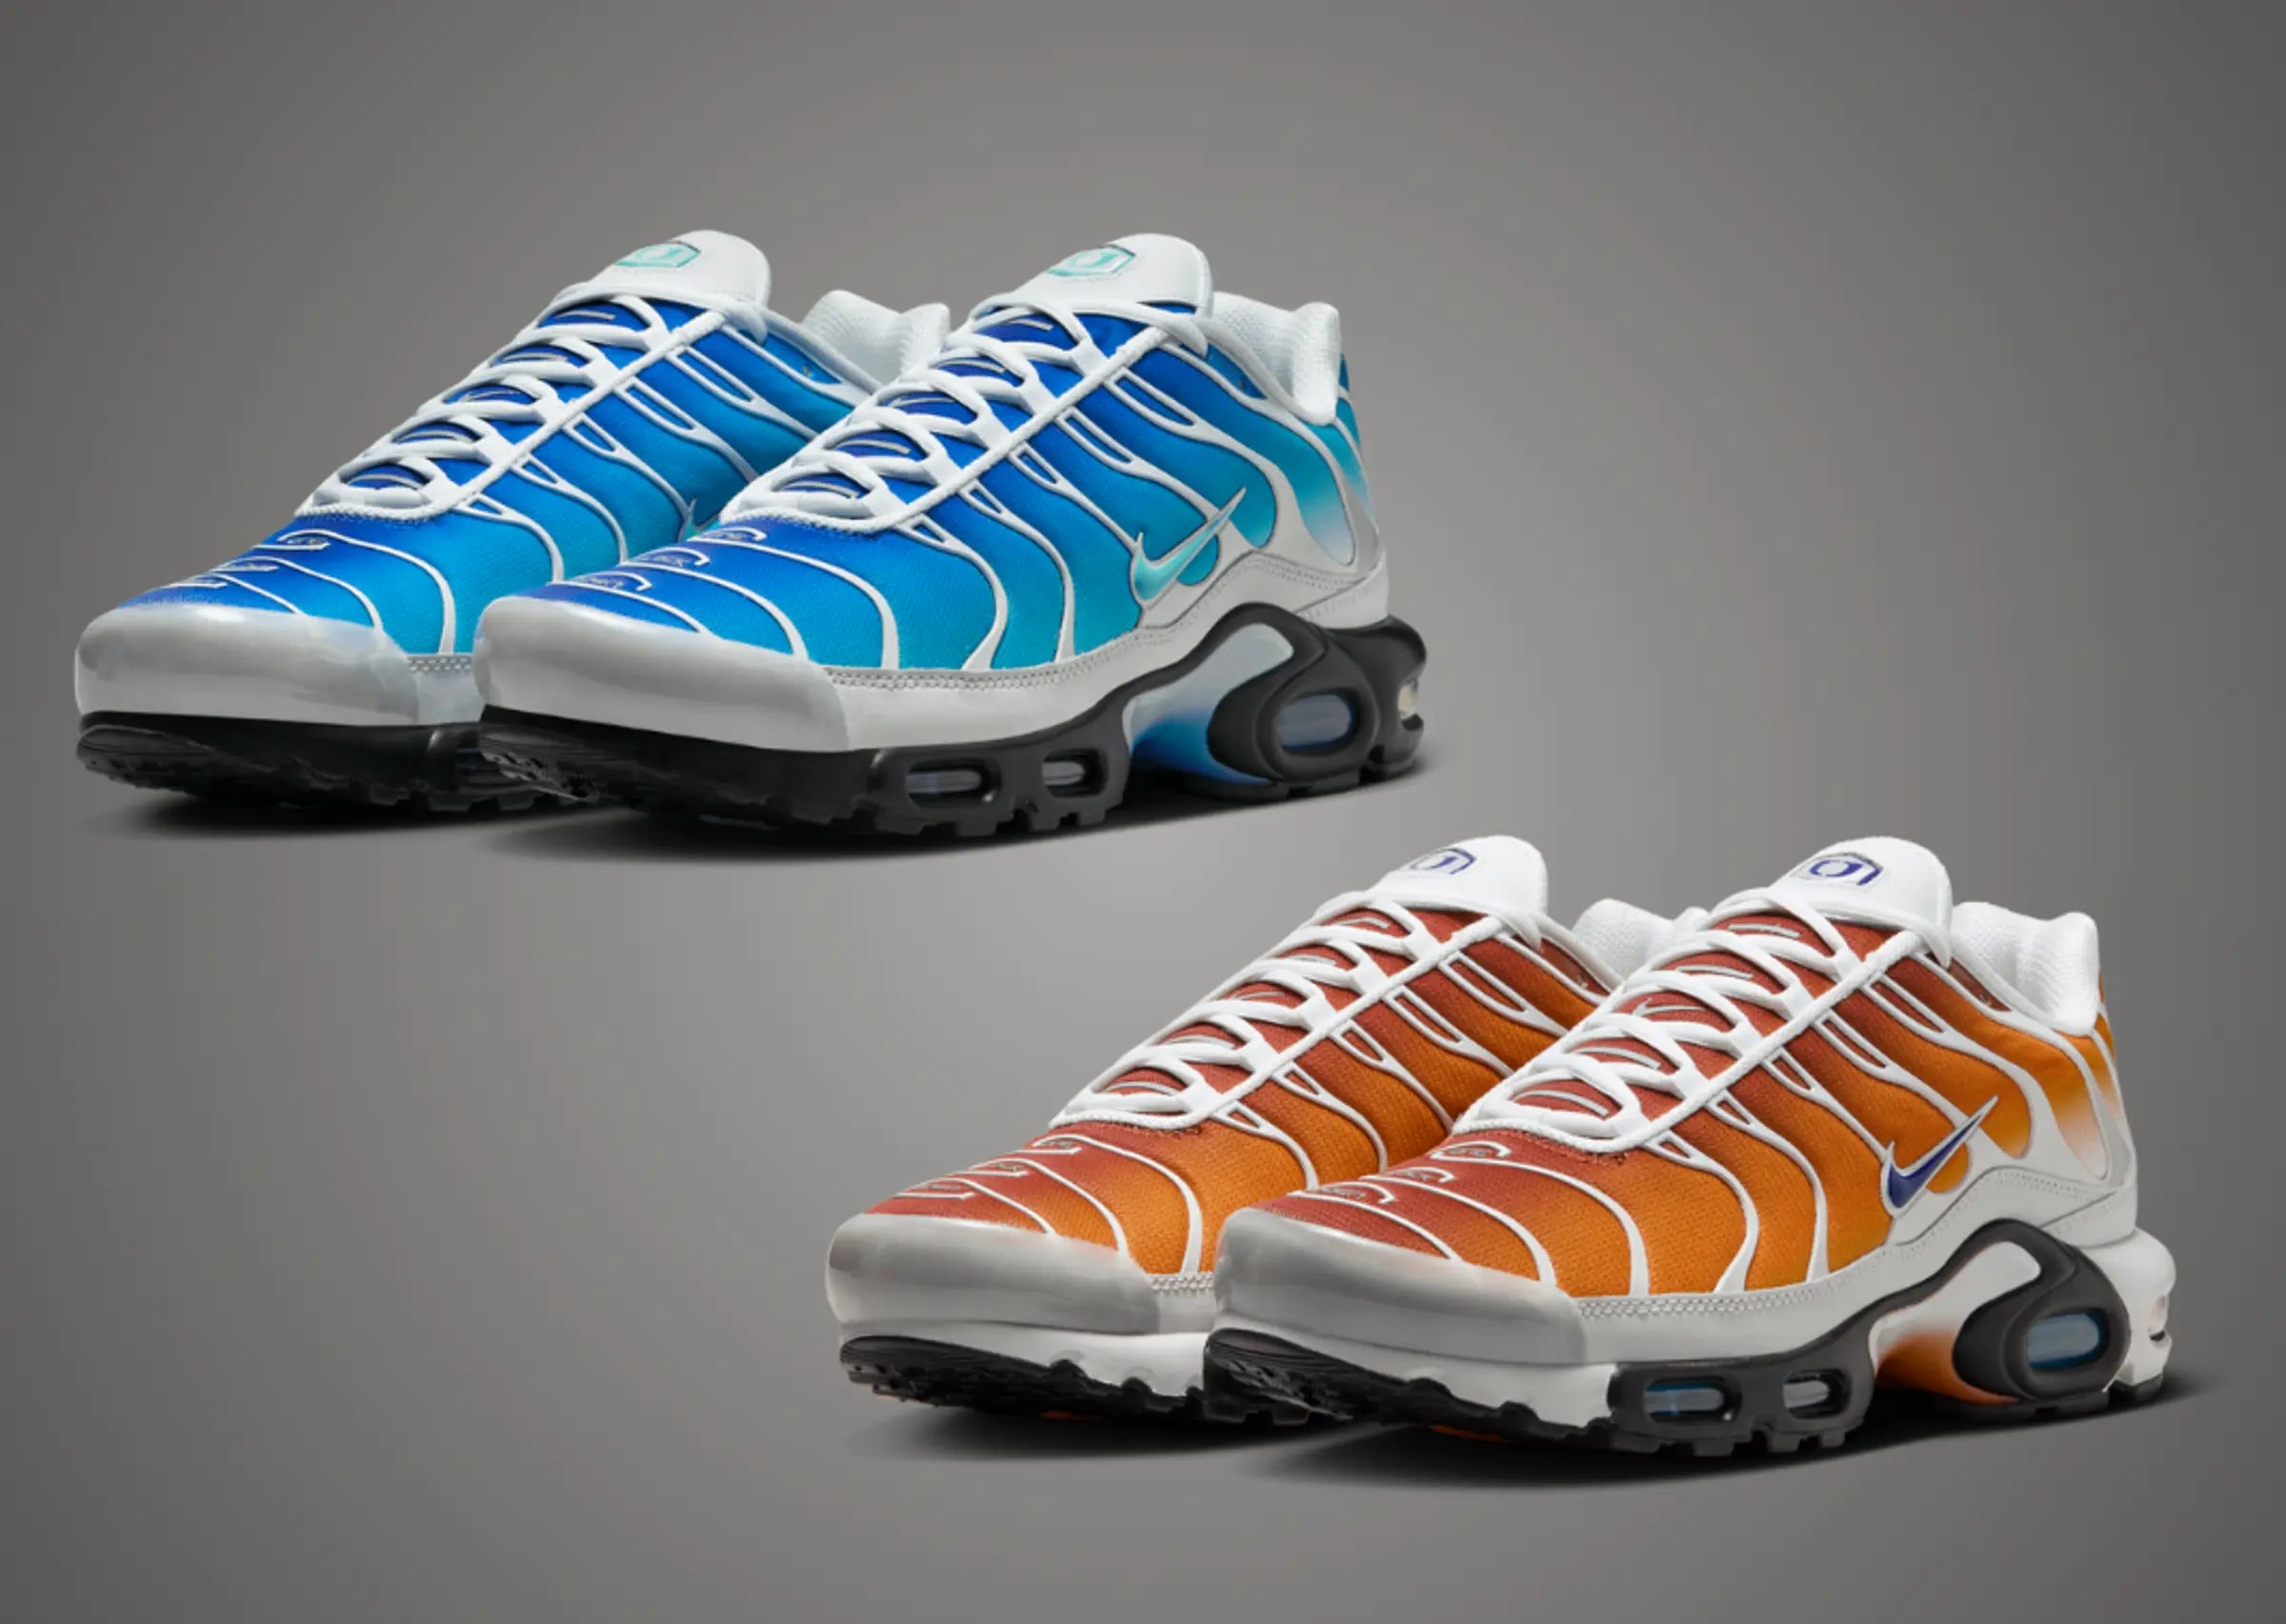 One Block Down x Nike Air Max Plus Pack: It will have a collar with a European retailer